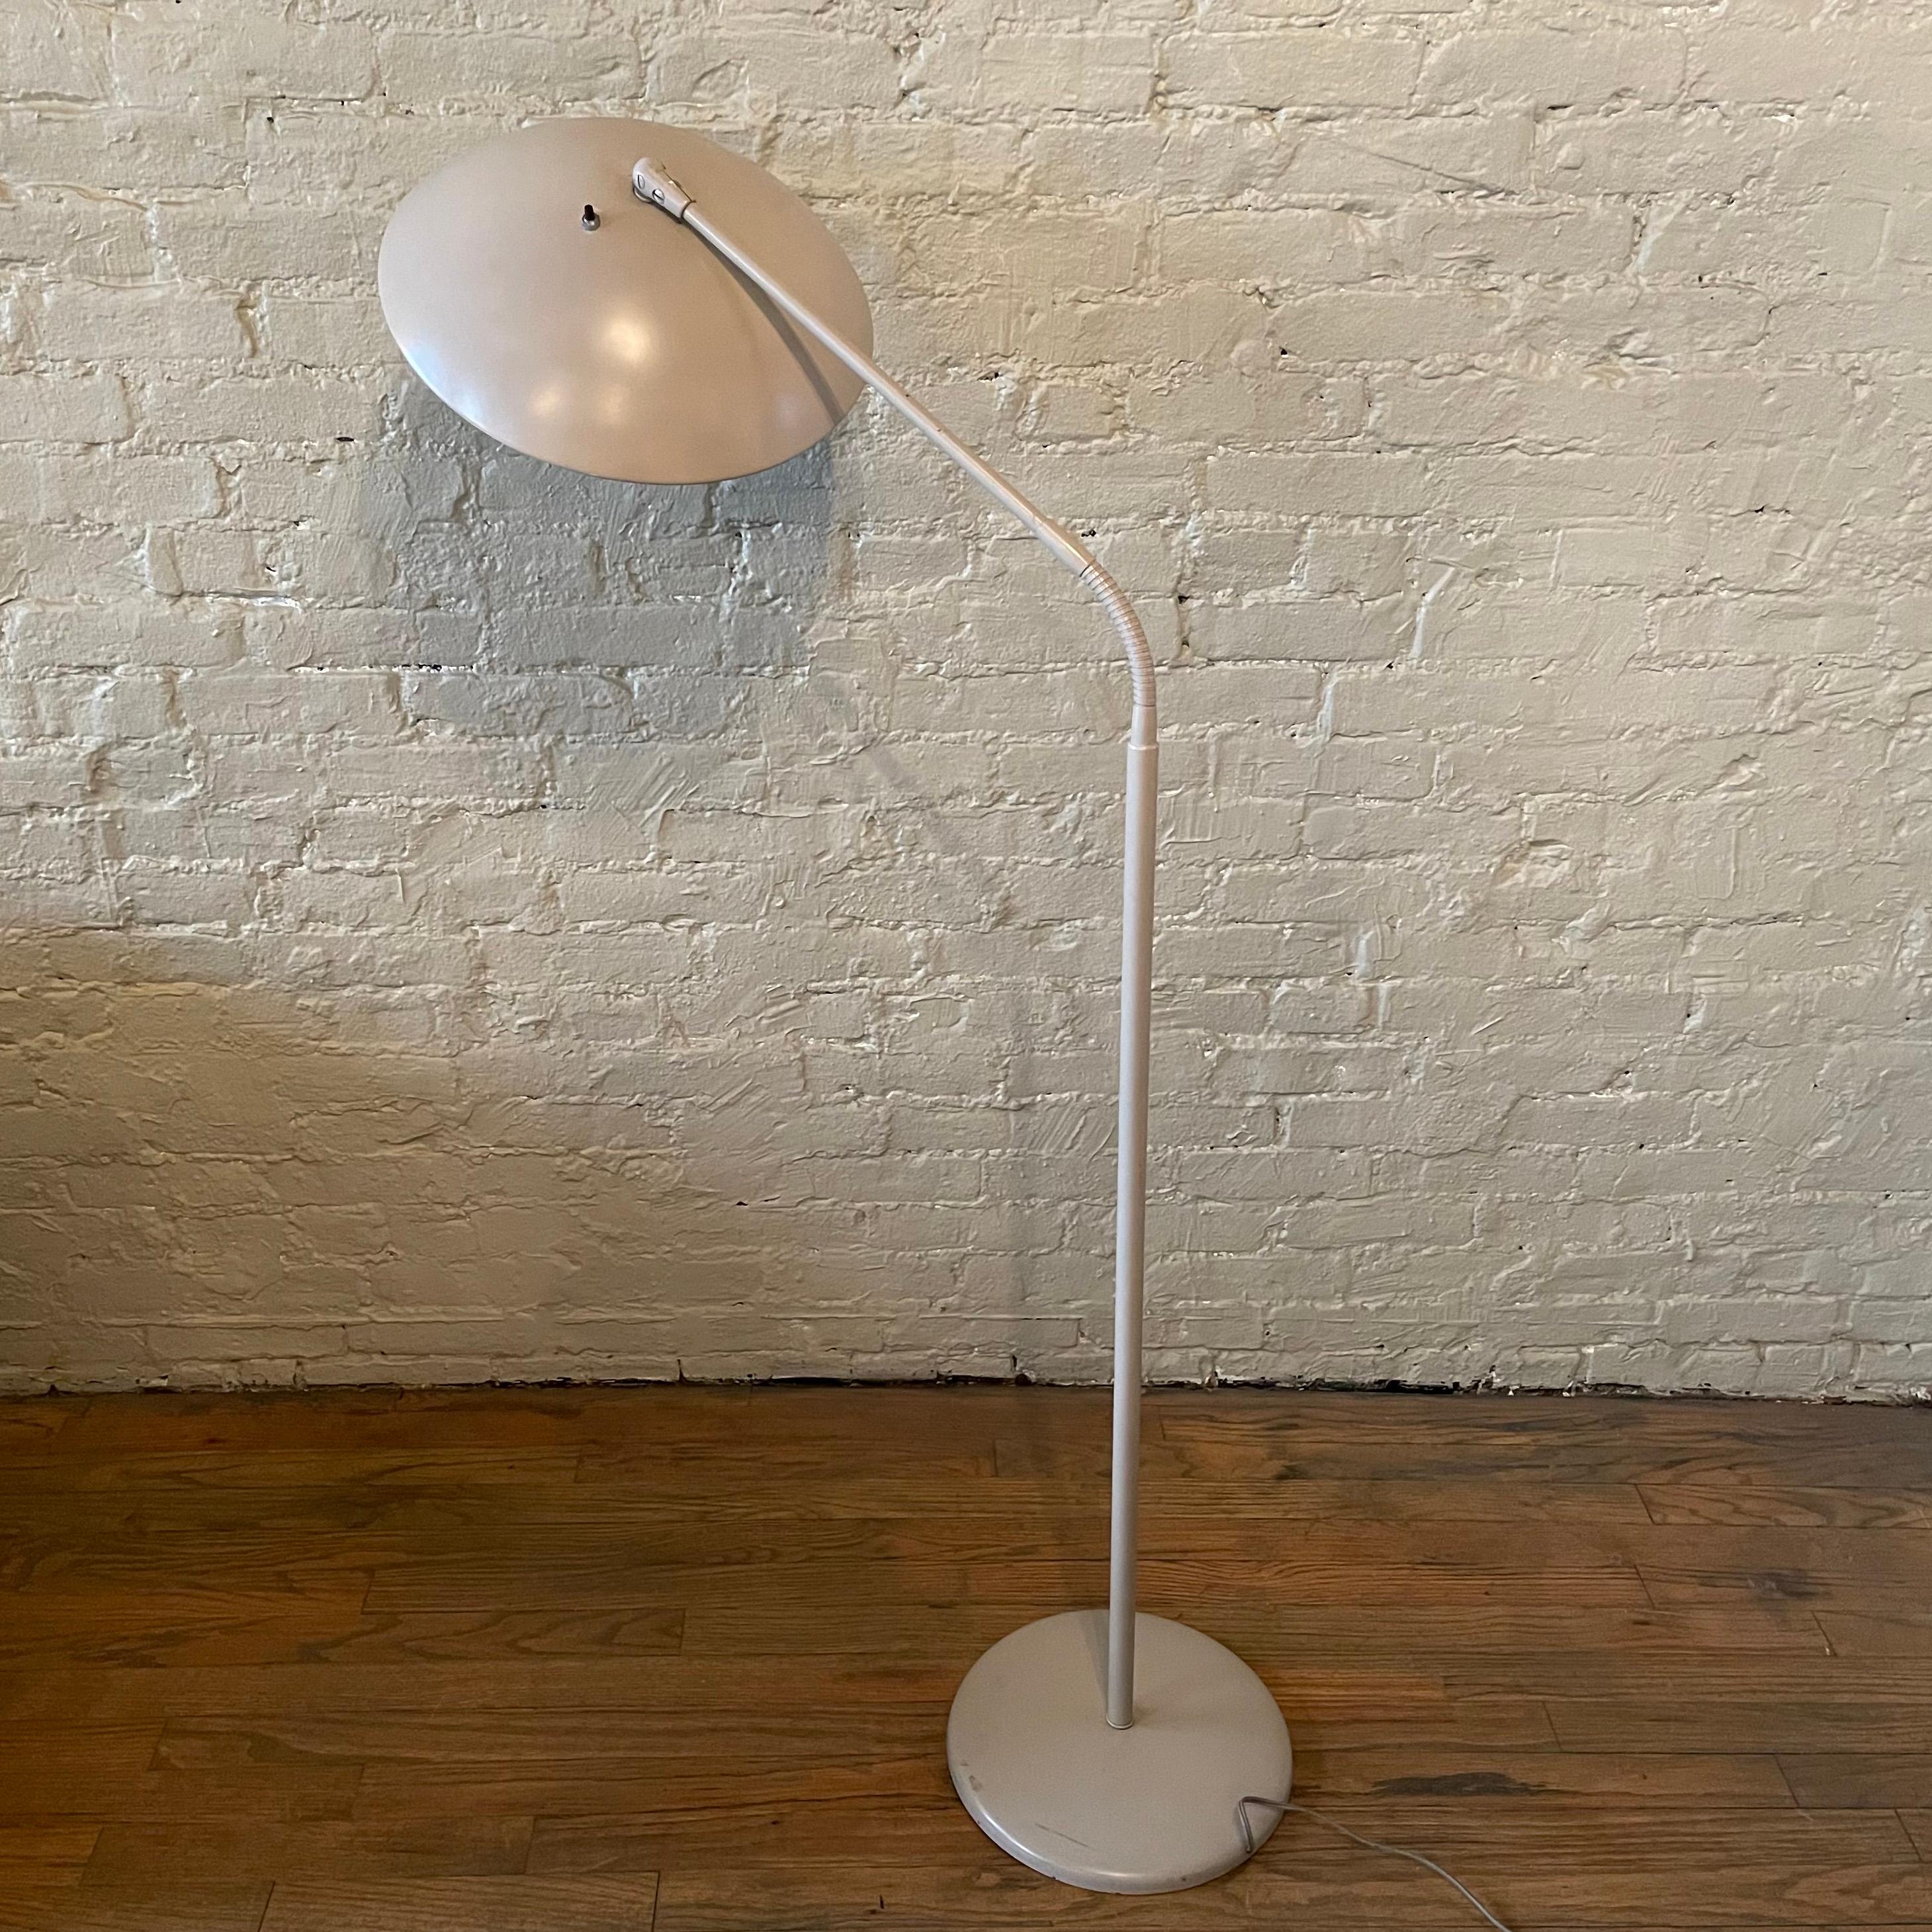 Mid-Century Modern, articulating, gooseneck, painted metal, floor lamp designed by Kurt Versen functions in a variety of ways. When adjusted down, with an overall reach of 30 inches, it's a reading lamp. When fully extended it's an uplight,